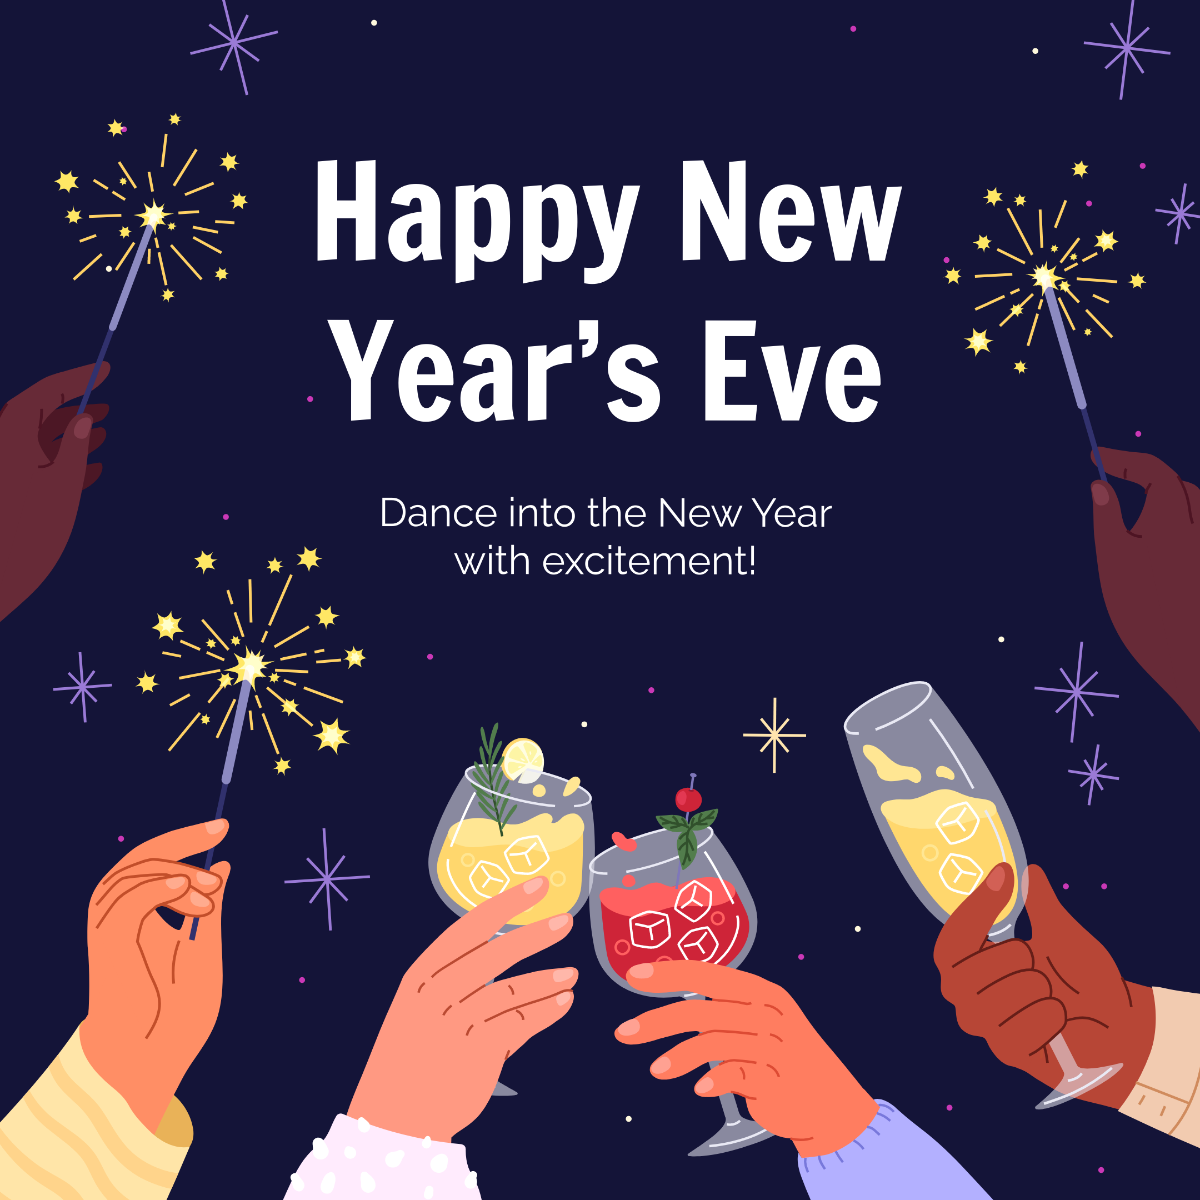 New Year Eve Social Media Post Template